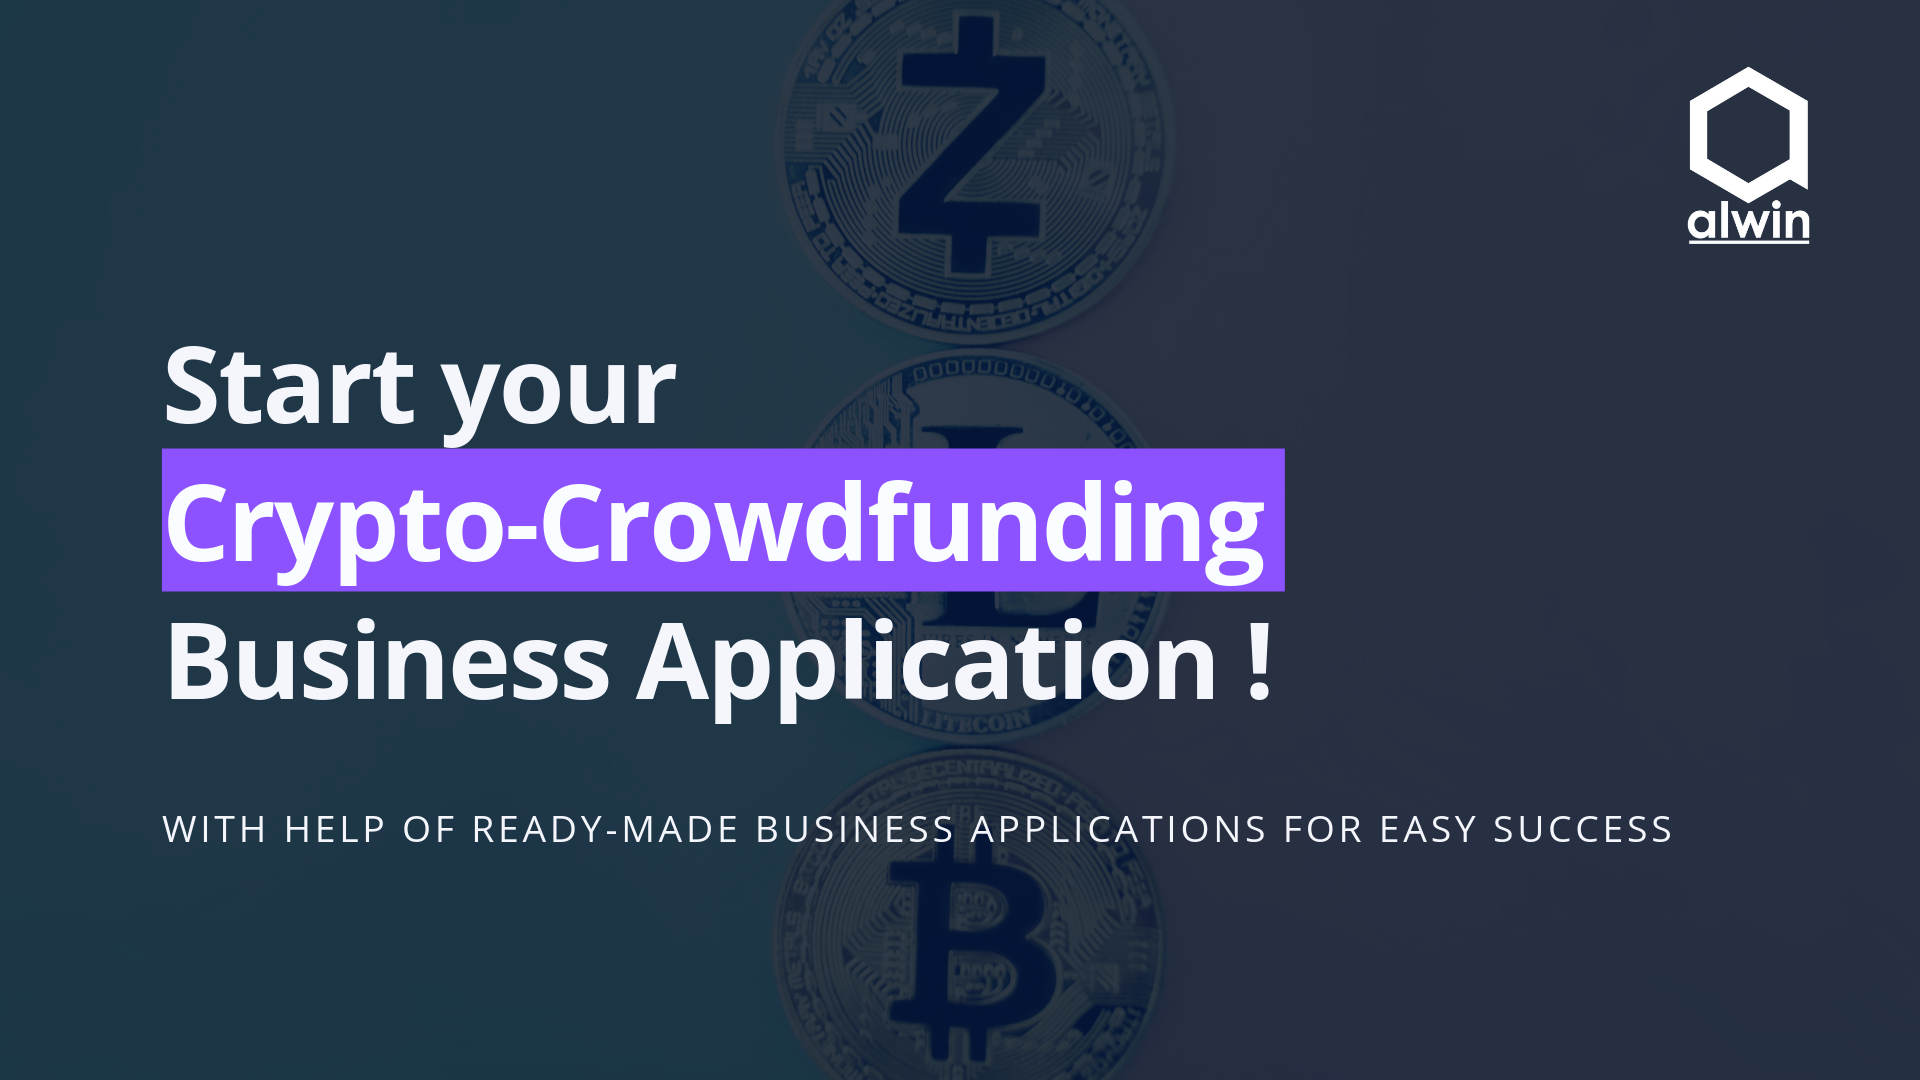 build-crowdfunding-platfrom-with-blockchain-technology